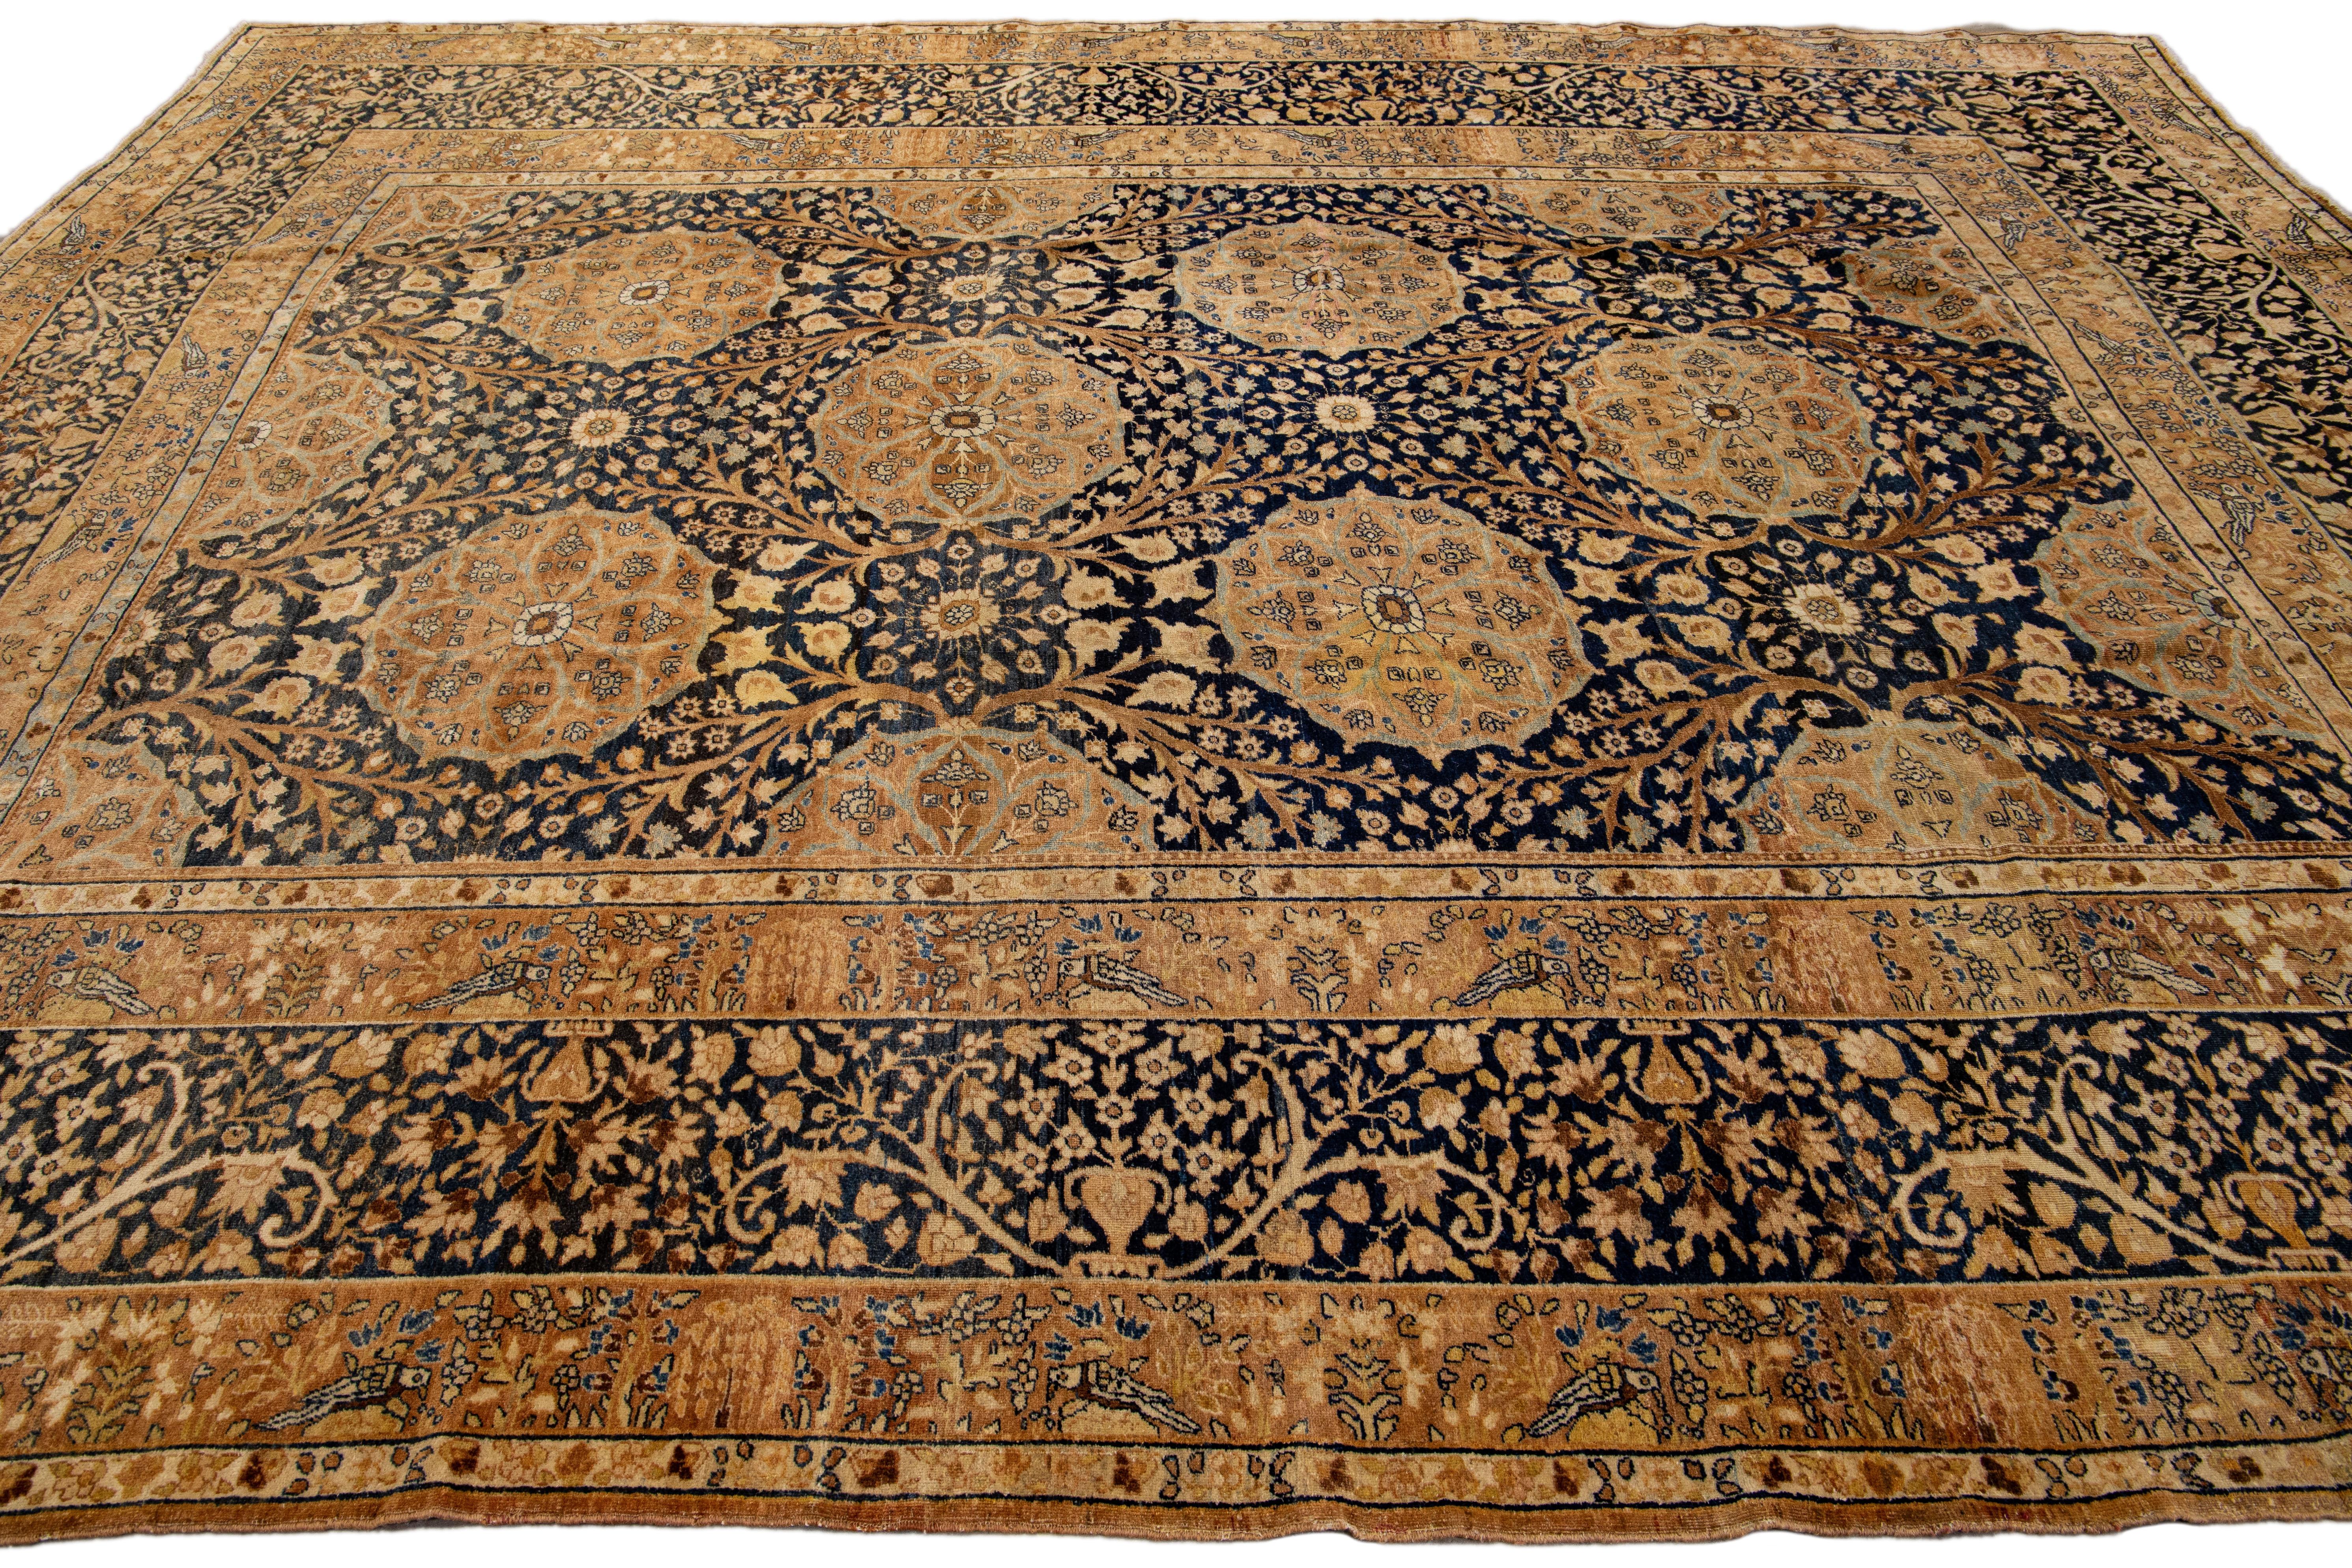 Antique Persian Kerman Handmade Allover Floral Blue and Tan Wool Rug In Excellent Condition For Sale In Norwalk, CT